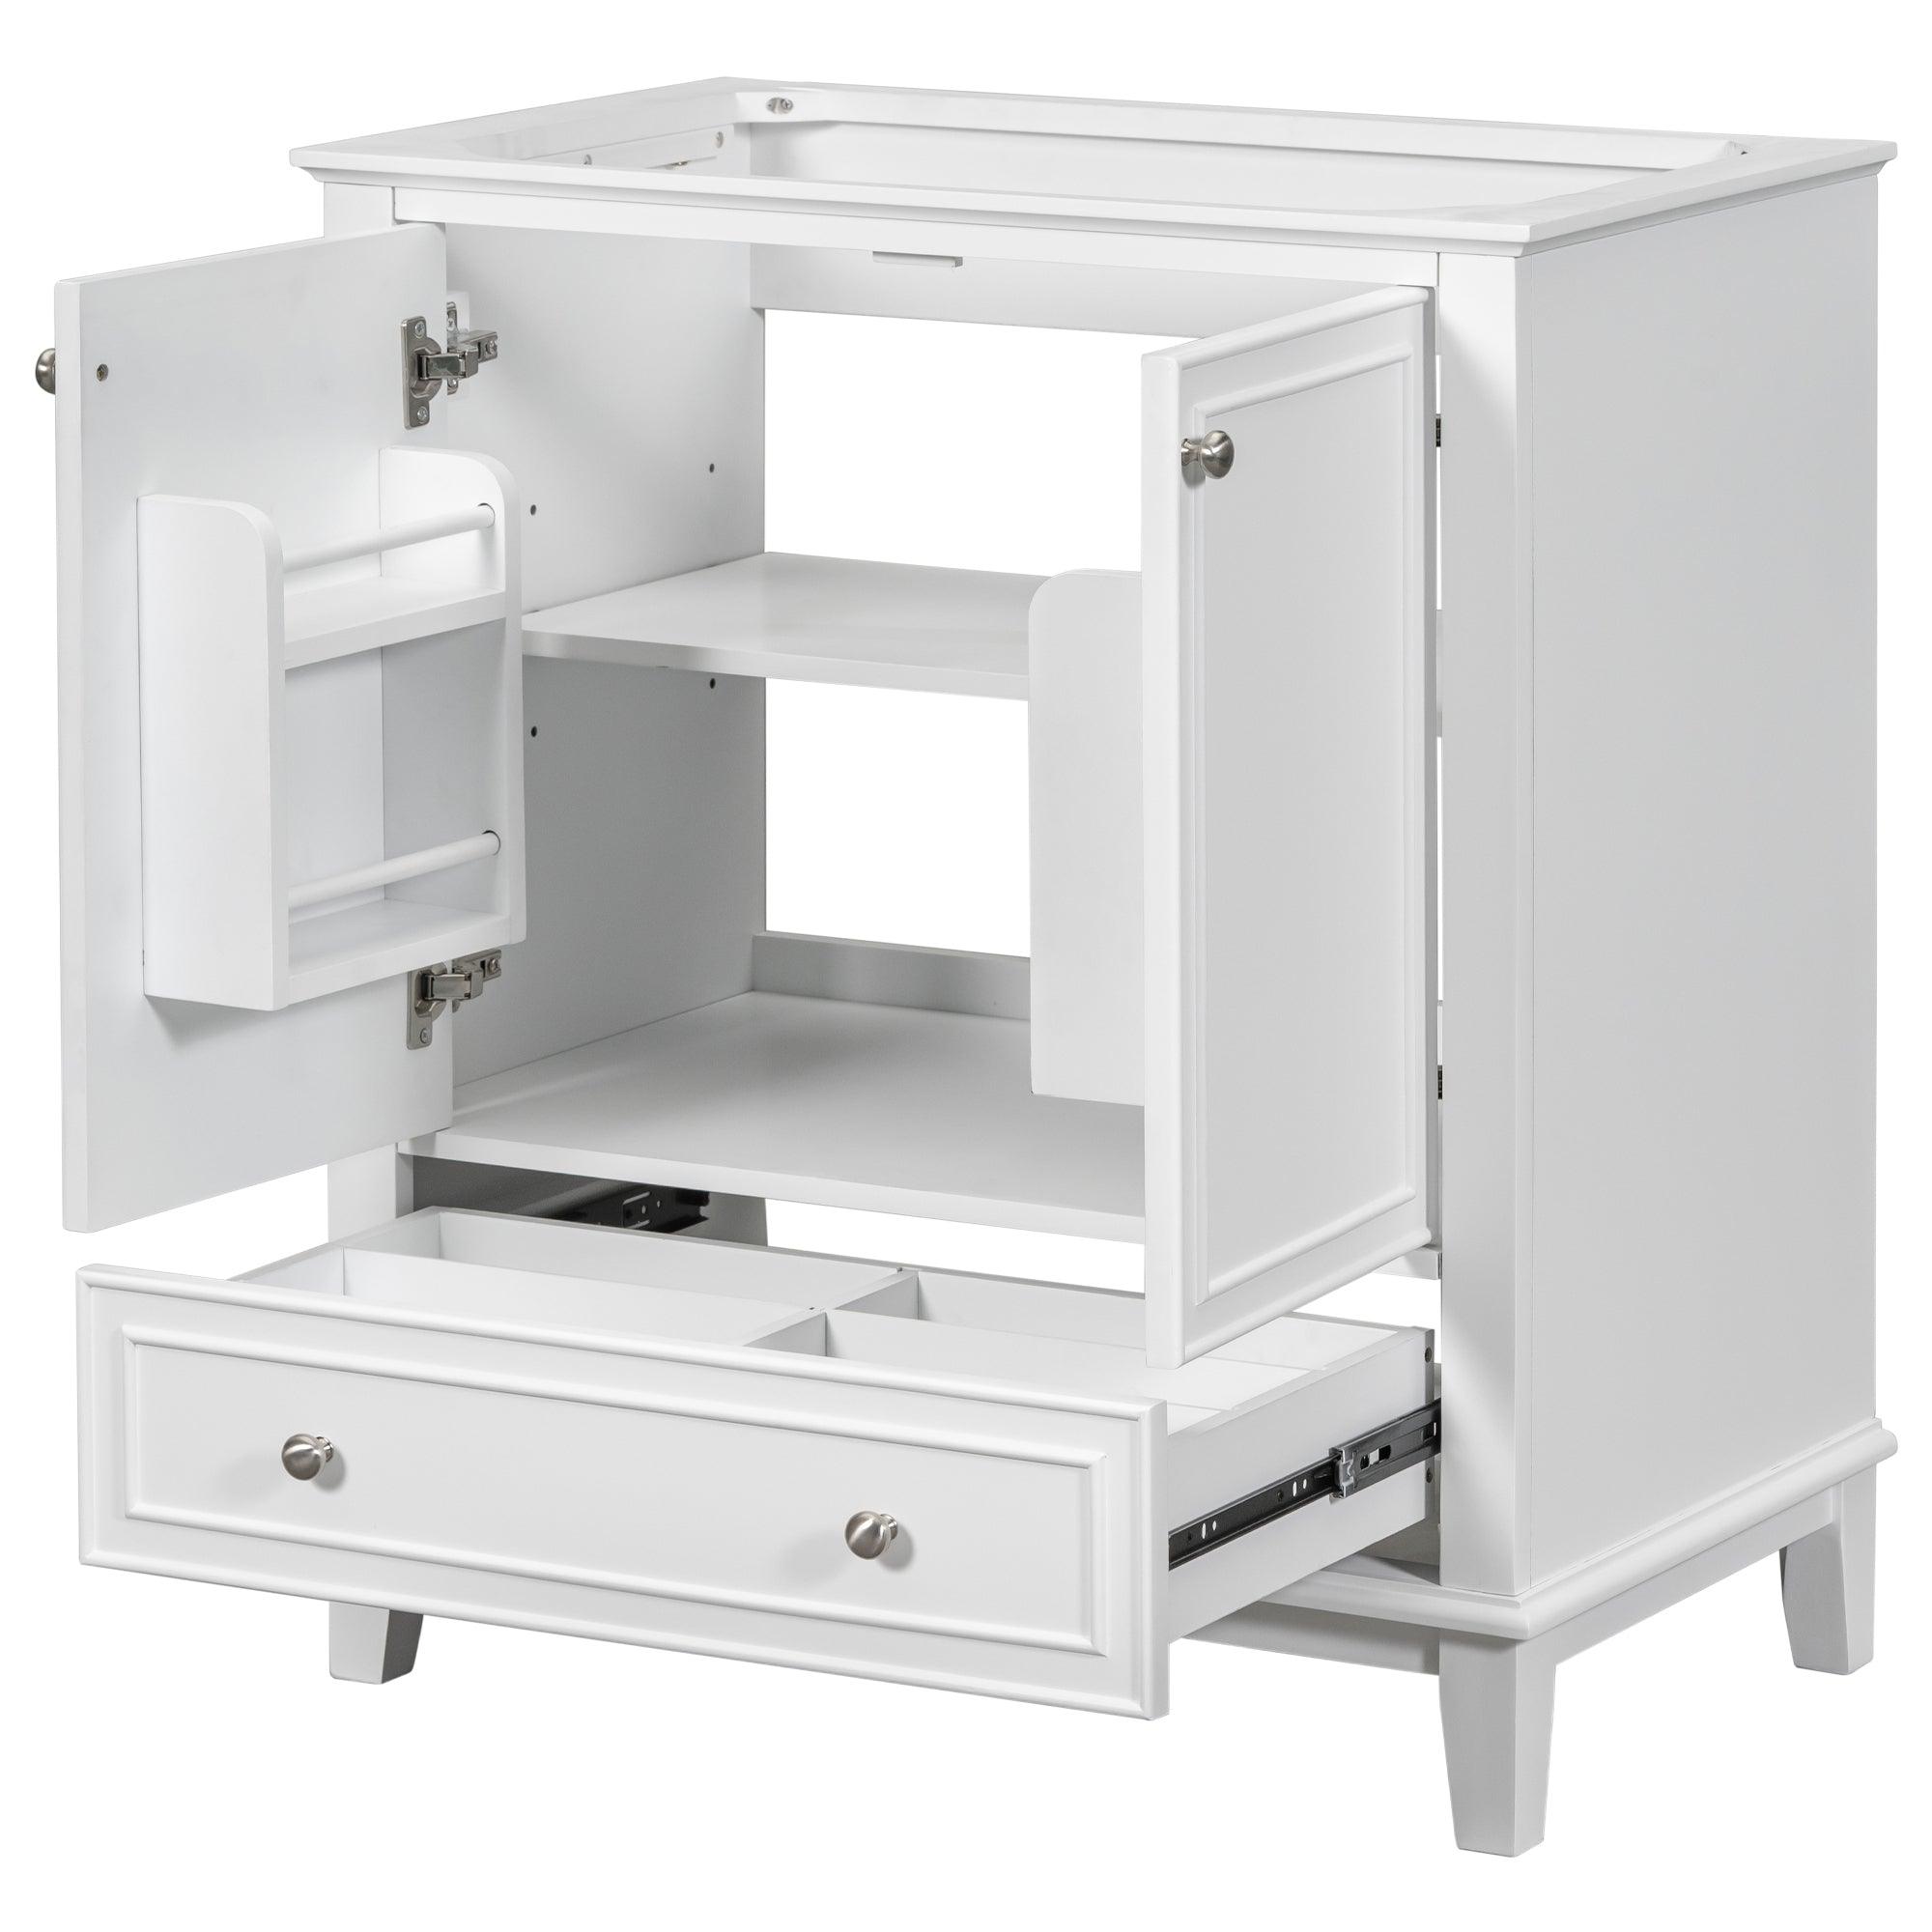 🆓🚛 30" Bathroom Vanity Without Sink, Base Only, Multi-Functional Bathroom Cabinet With Doors & Drawer, Solid Frame & Mdf Board, White